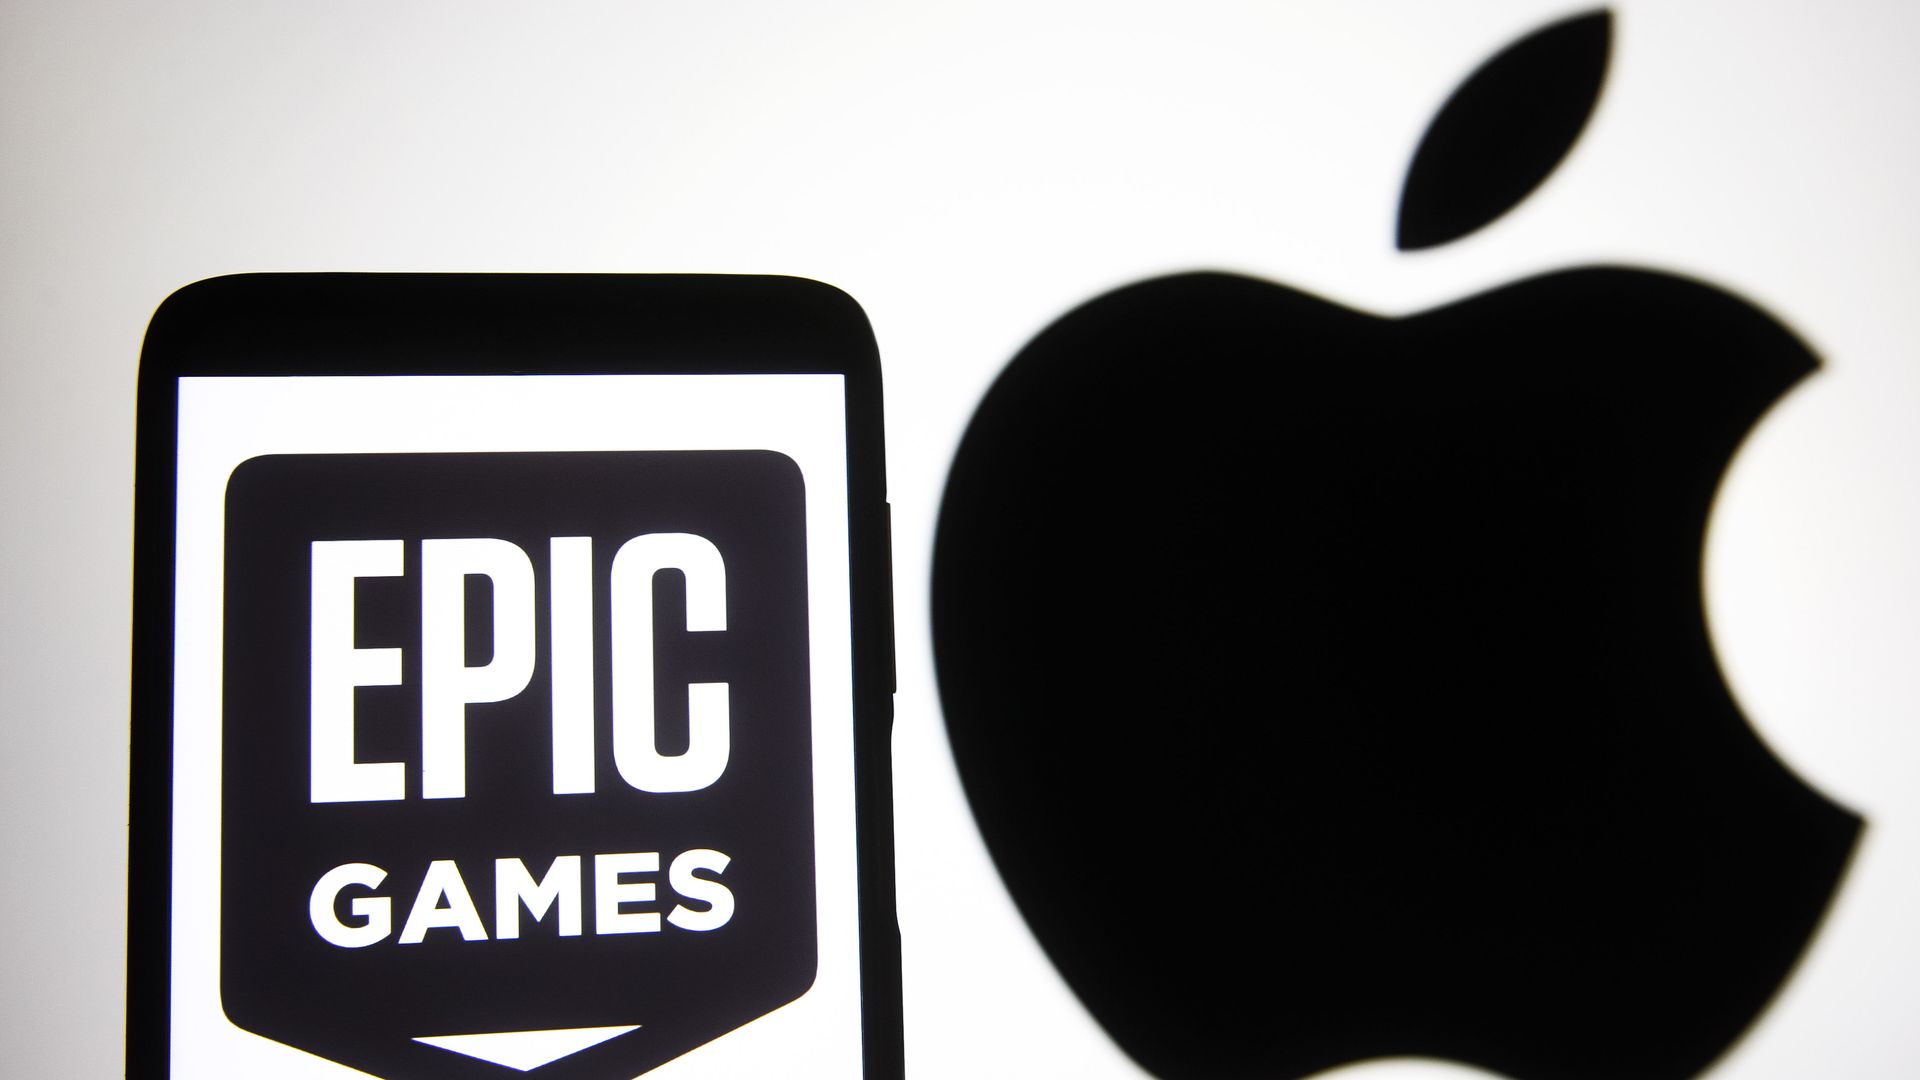 Epic games and Apple's logos. 